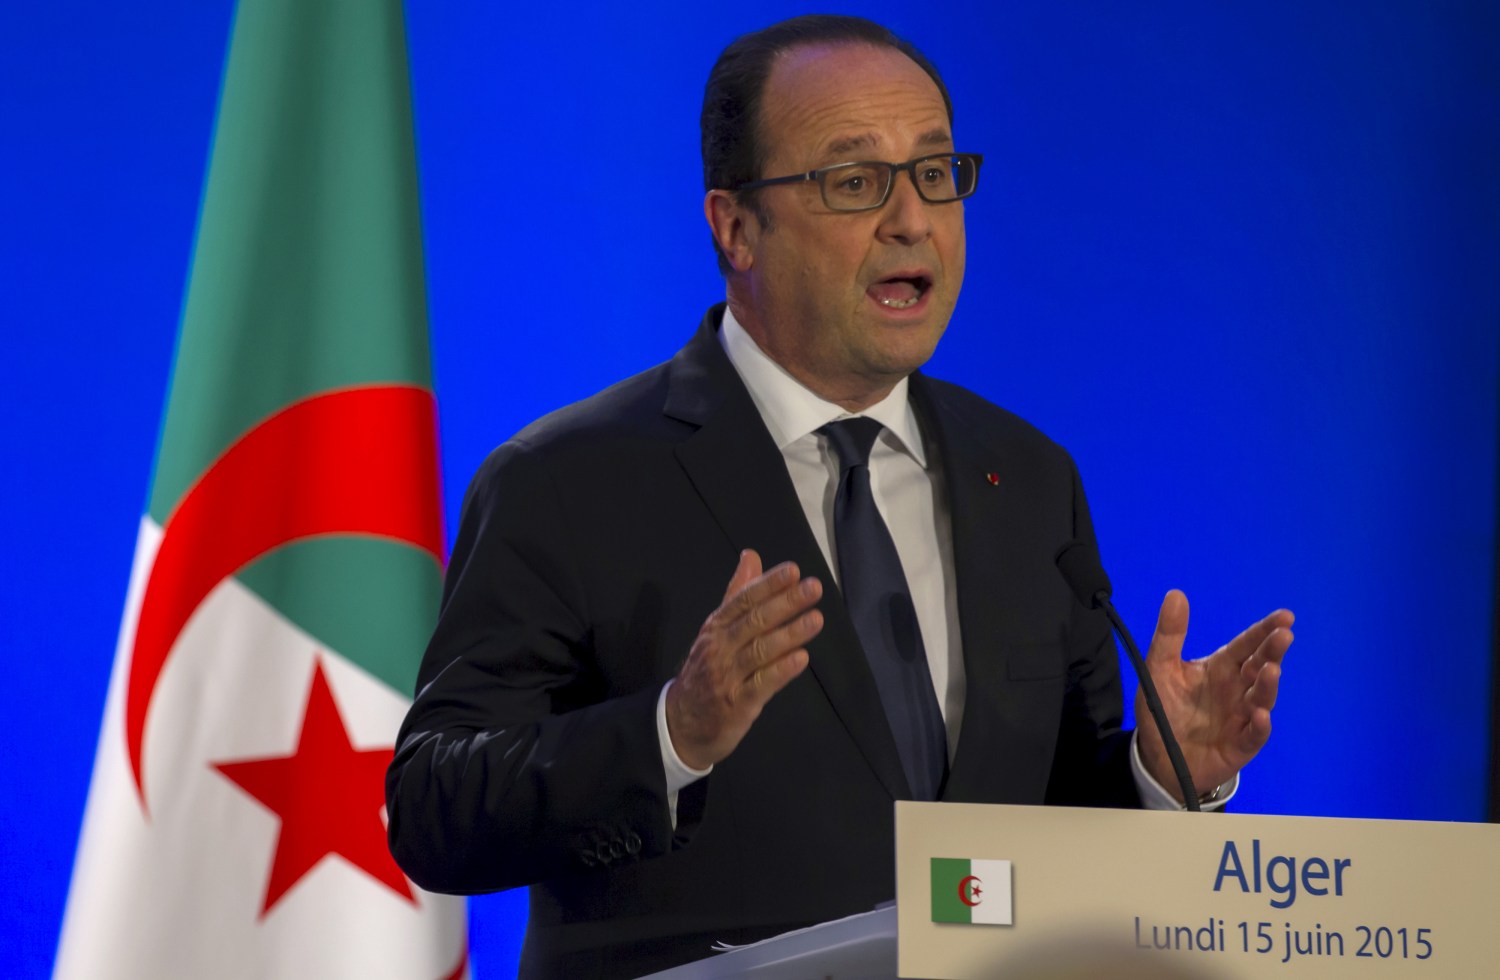 French President Hollande speaks during a news conference in Algiers